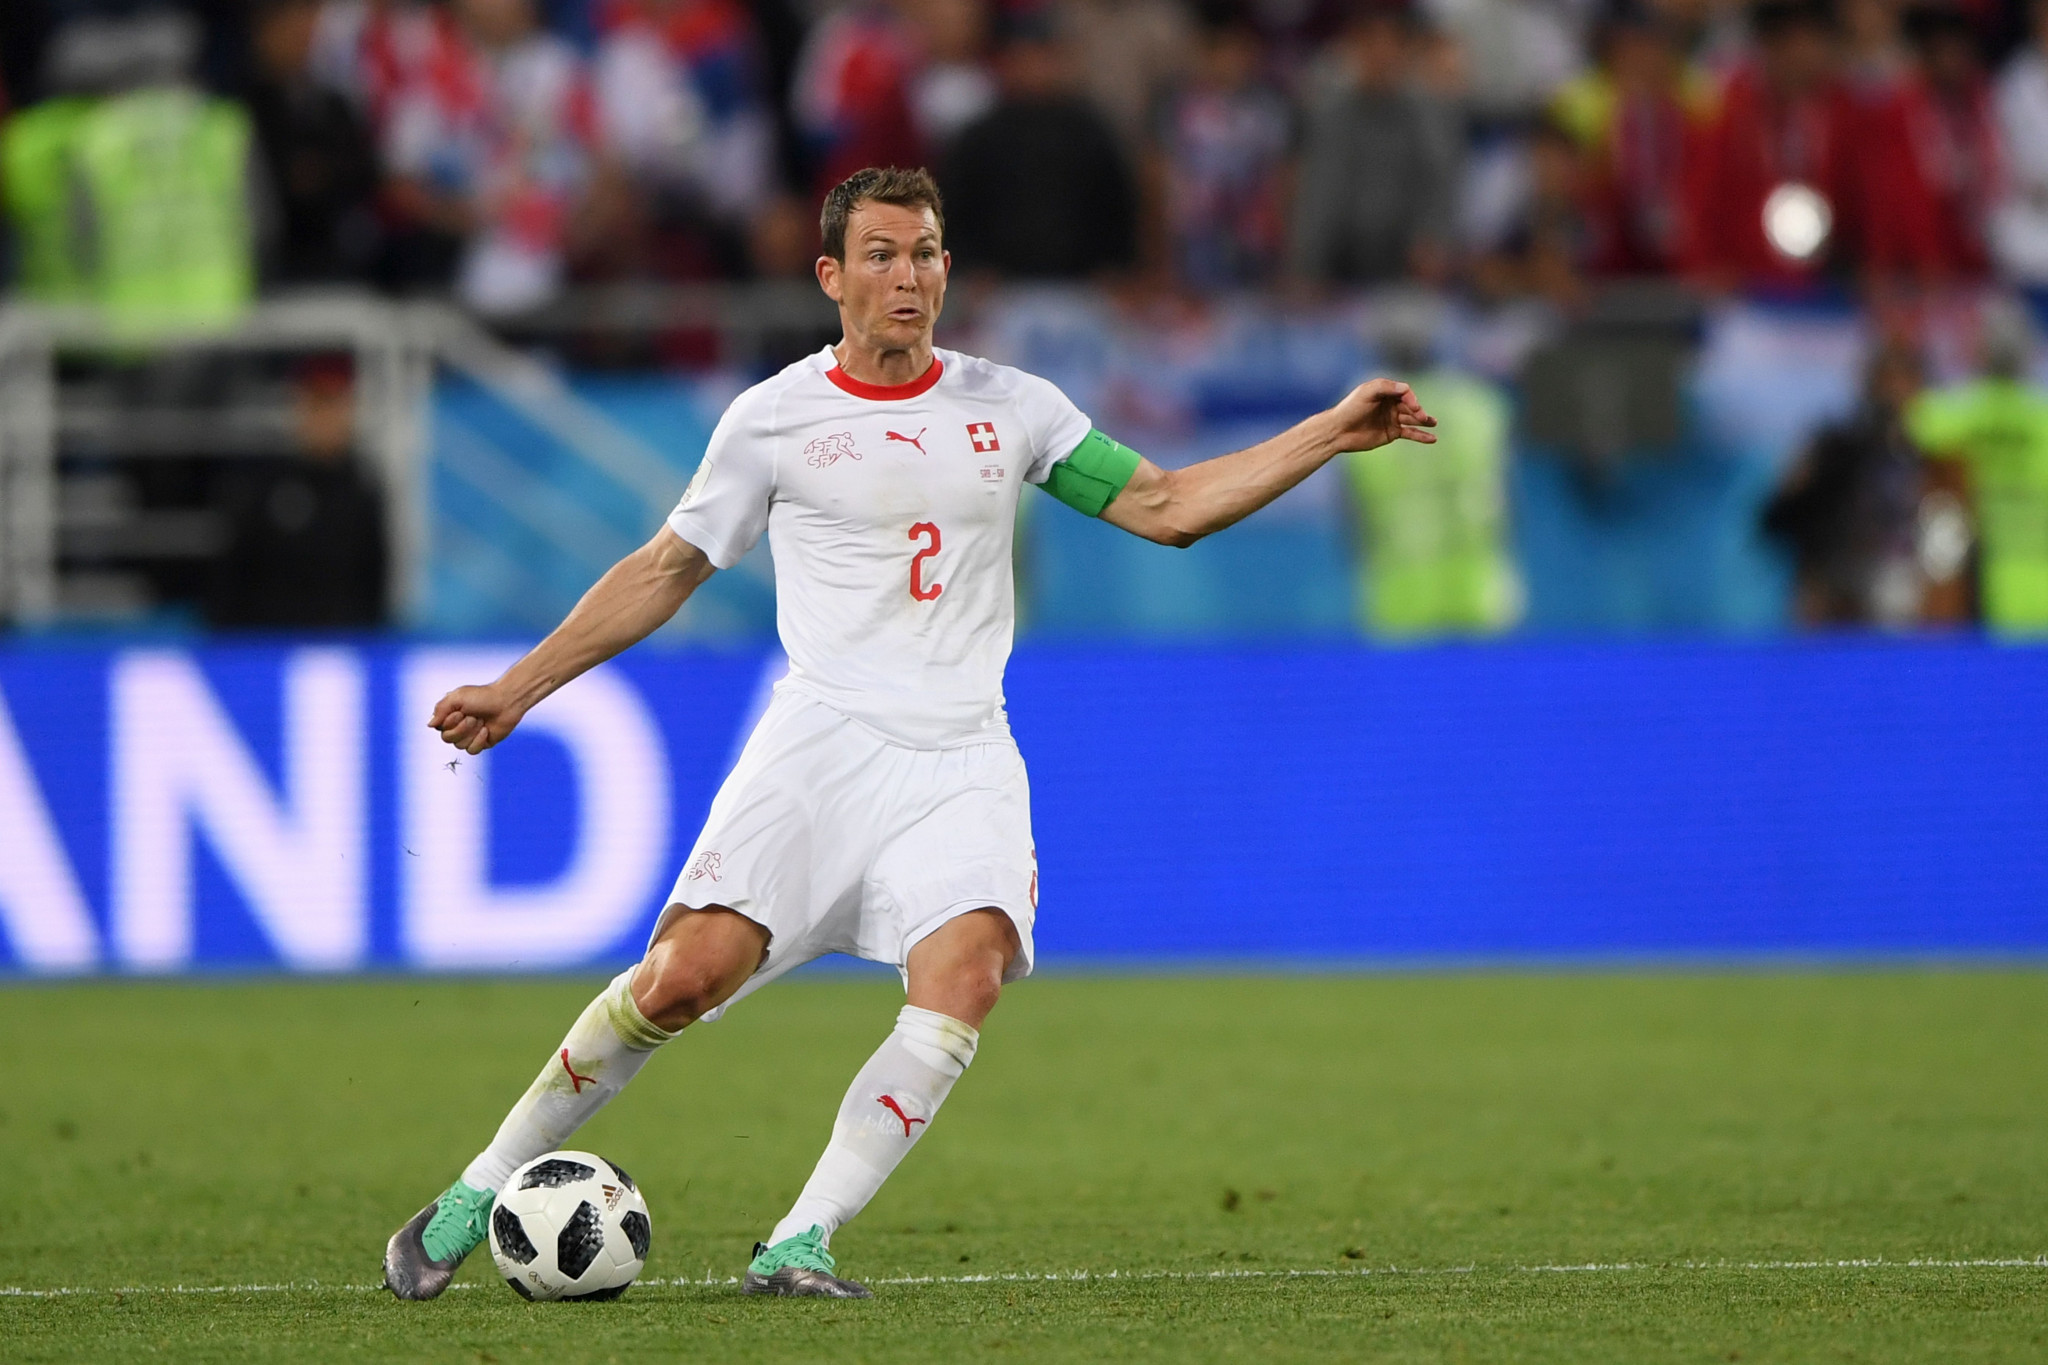 Stephan Lichsteiner is among three players from Switzerland to be fined by FIFA following their controversial goal celebration in their country's 2-1 victory over Serbia at the World Cup in Russia ©Getty Images